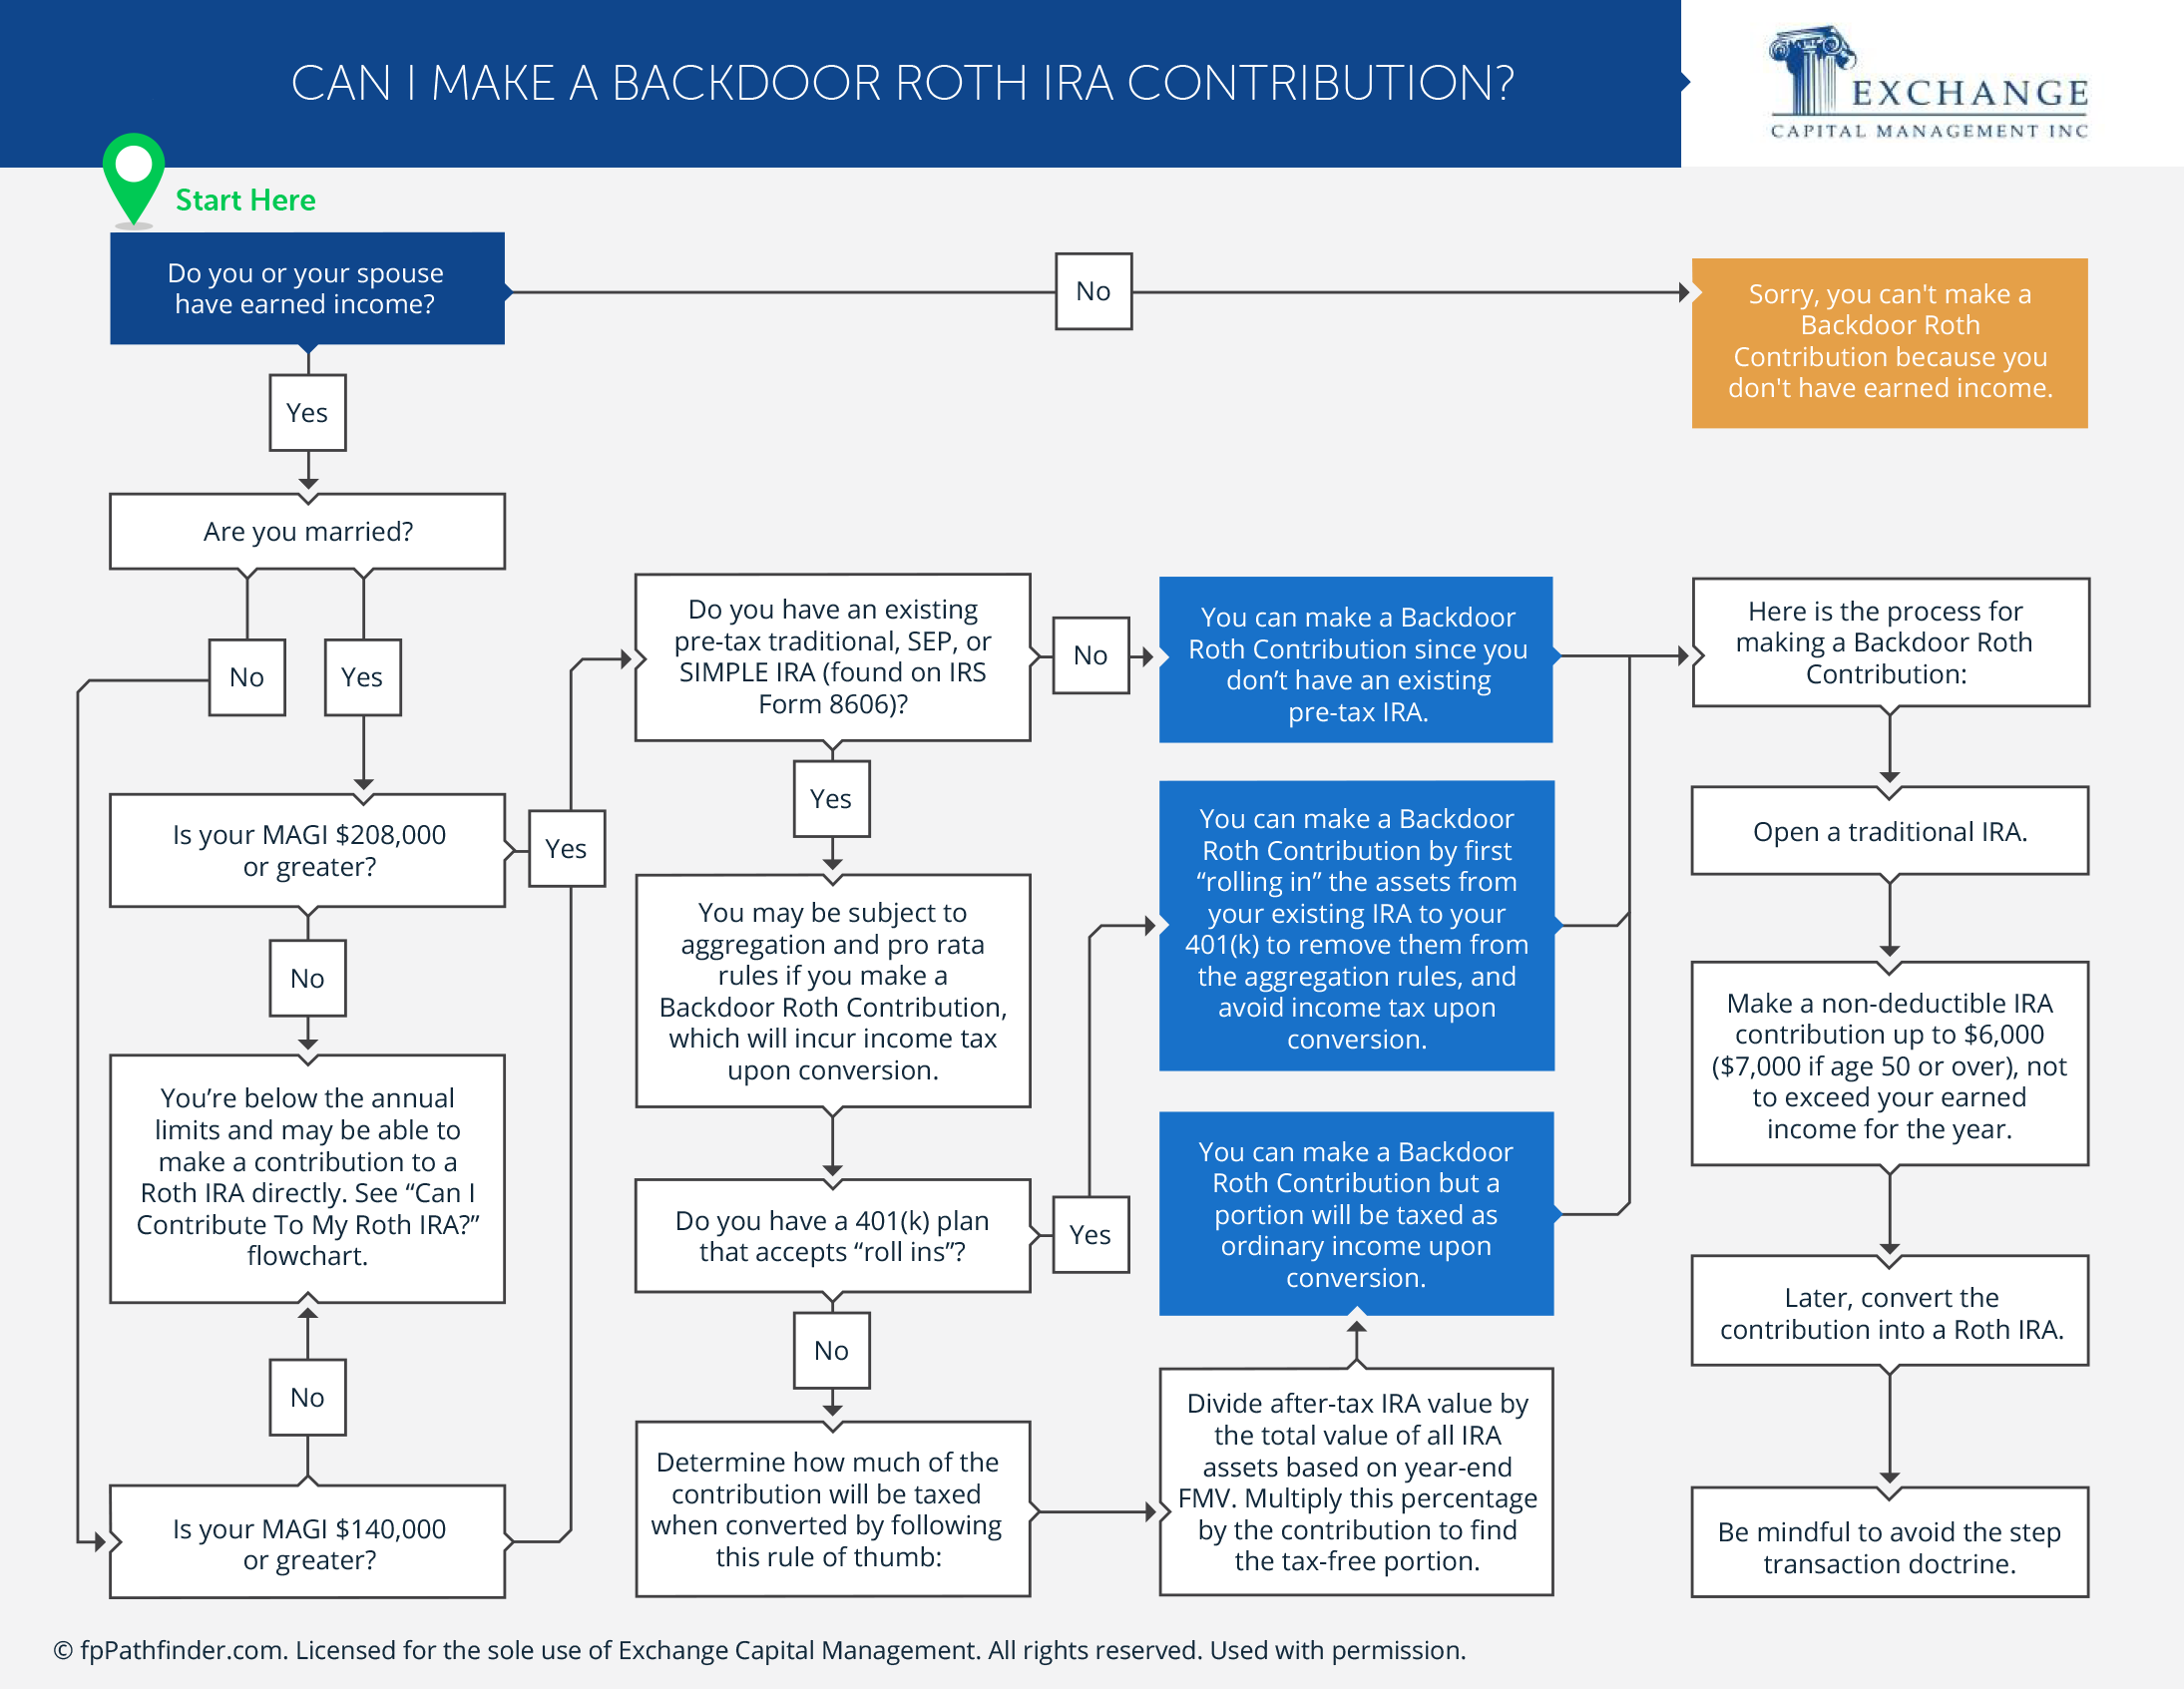 Can I Make a Backdoor Roth IRA Contribution?